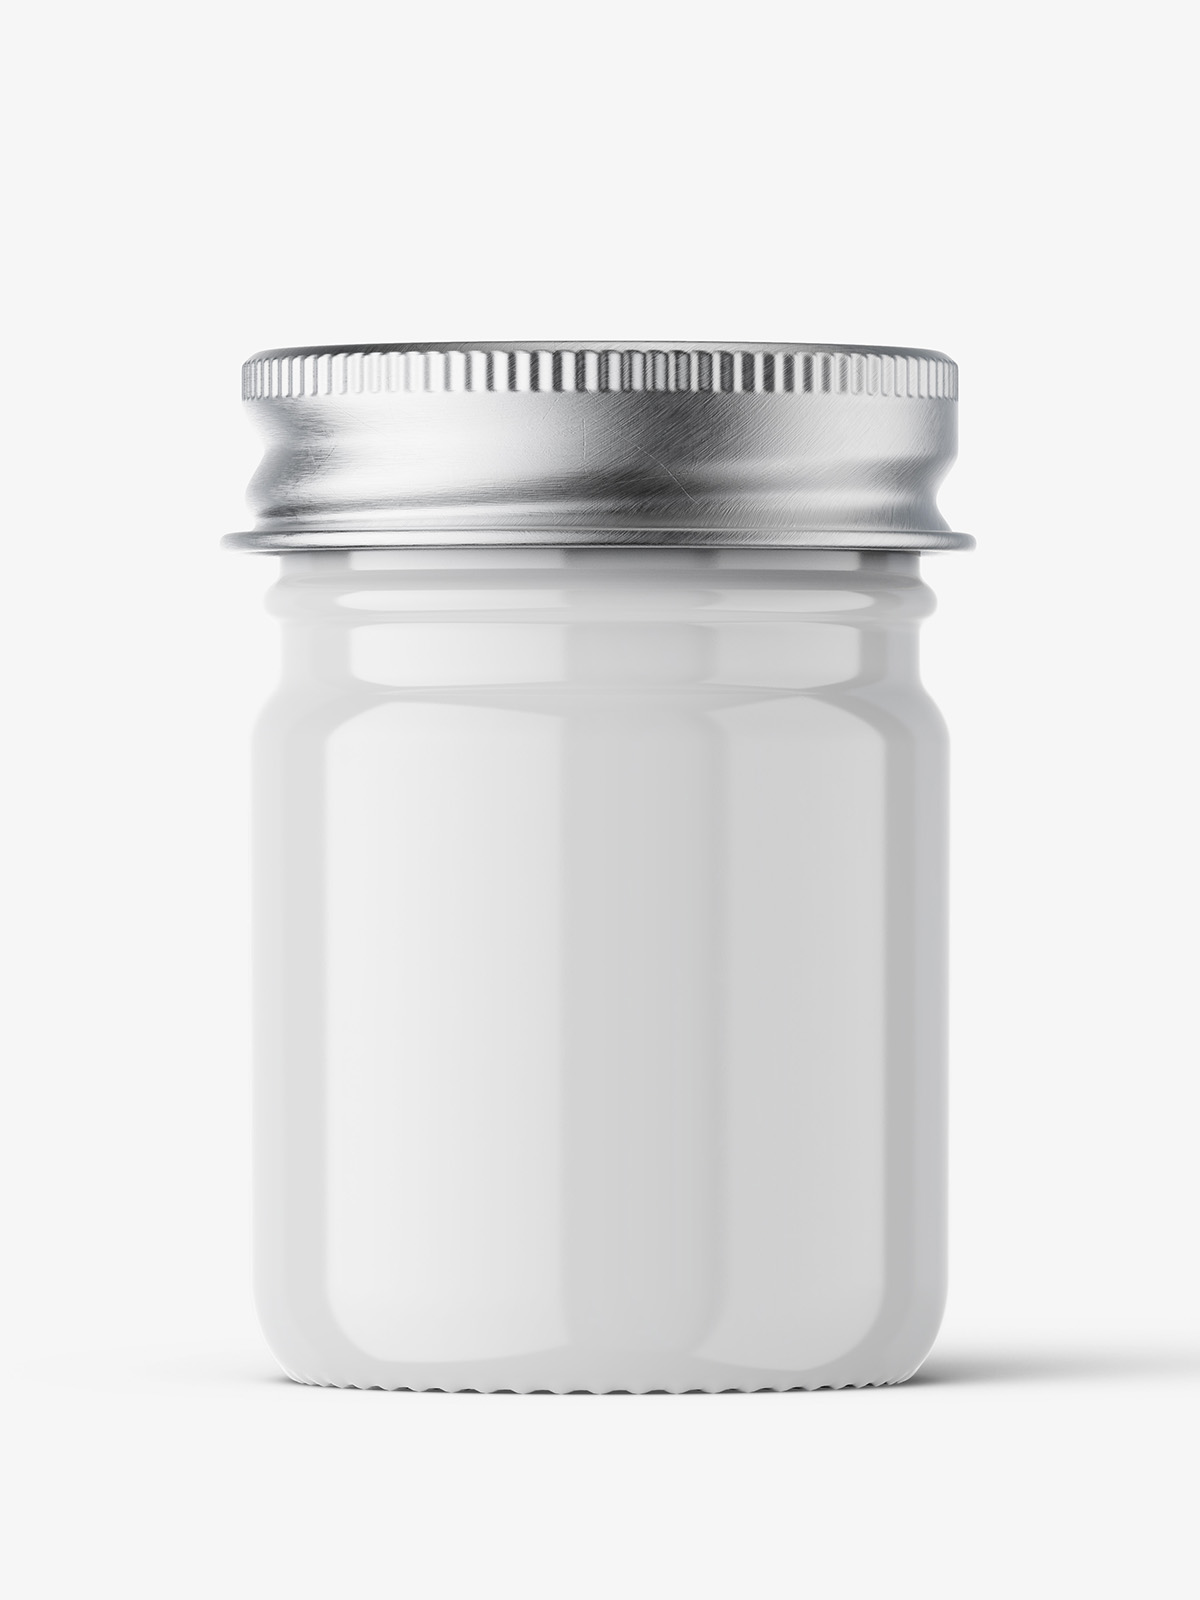 Download Small Jar Mockup With Silver Cap Glossy Smarty Mockups